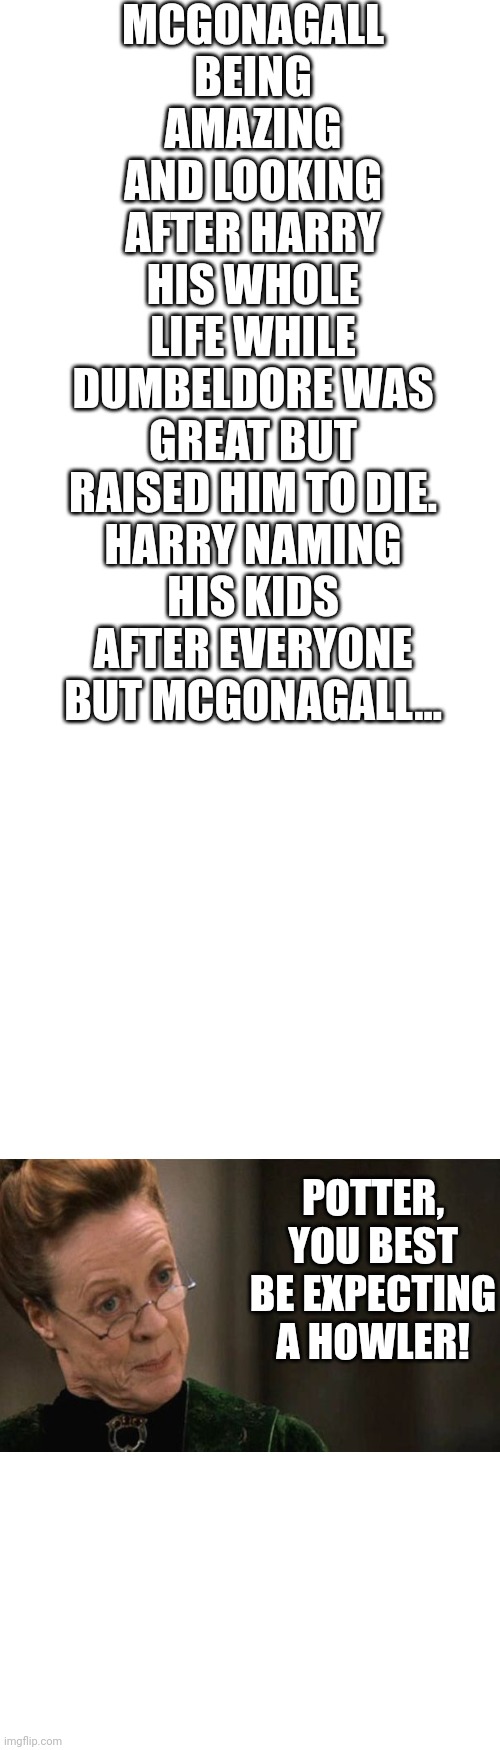 McGonagall deserves better :( | MCGONAGALL BEING AMAZING AND LOOKING AFTER HARRY HIS WHOLE LIFE WHILE DUMBELDORE WAS GREAT BUT RAISED HIM TO DIE.

HARRY NAMING HIS KIDS AFTER EVERYONE BUT MCGONAGALL... POTTER, YOU BEST BE EXPECTING A HOWLER! | image tagged in long blank white template | made w/ Imgflip meme maker